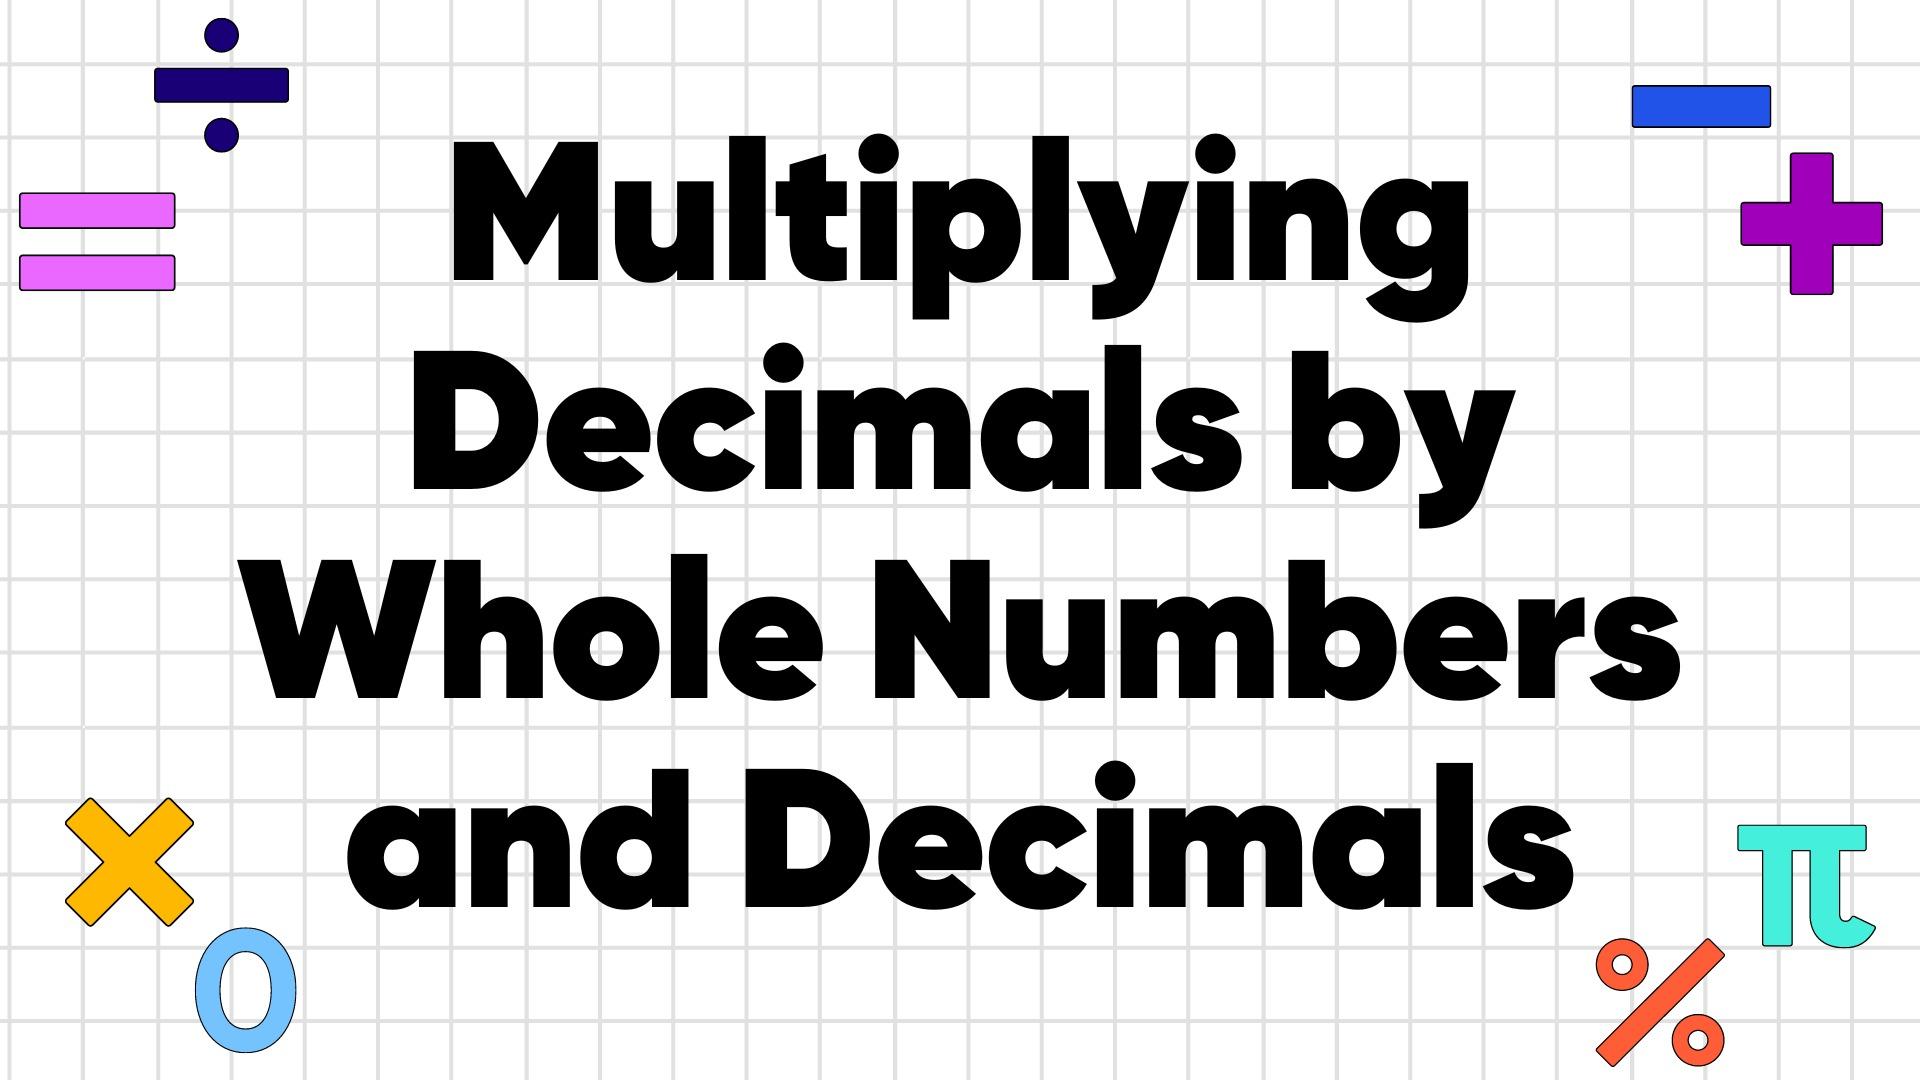 How to Multiply Decimals by Whole Numbers and Decimals